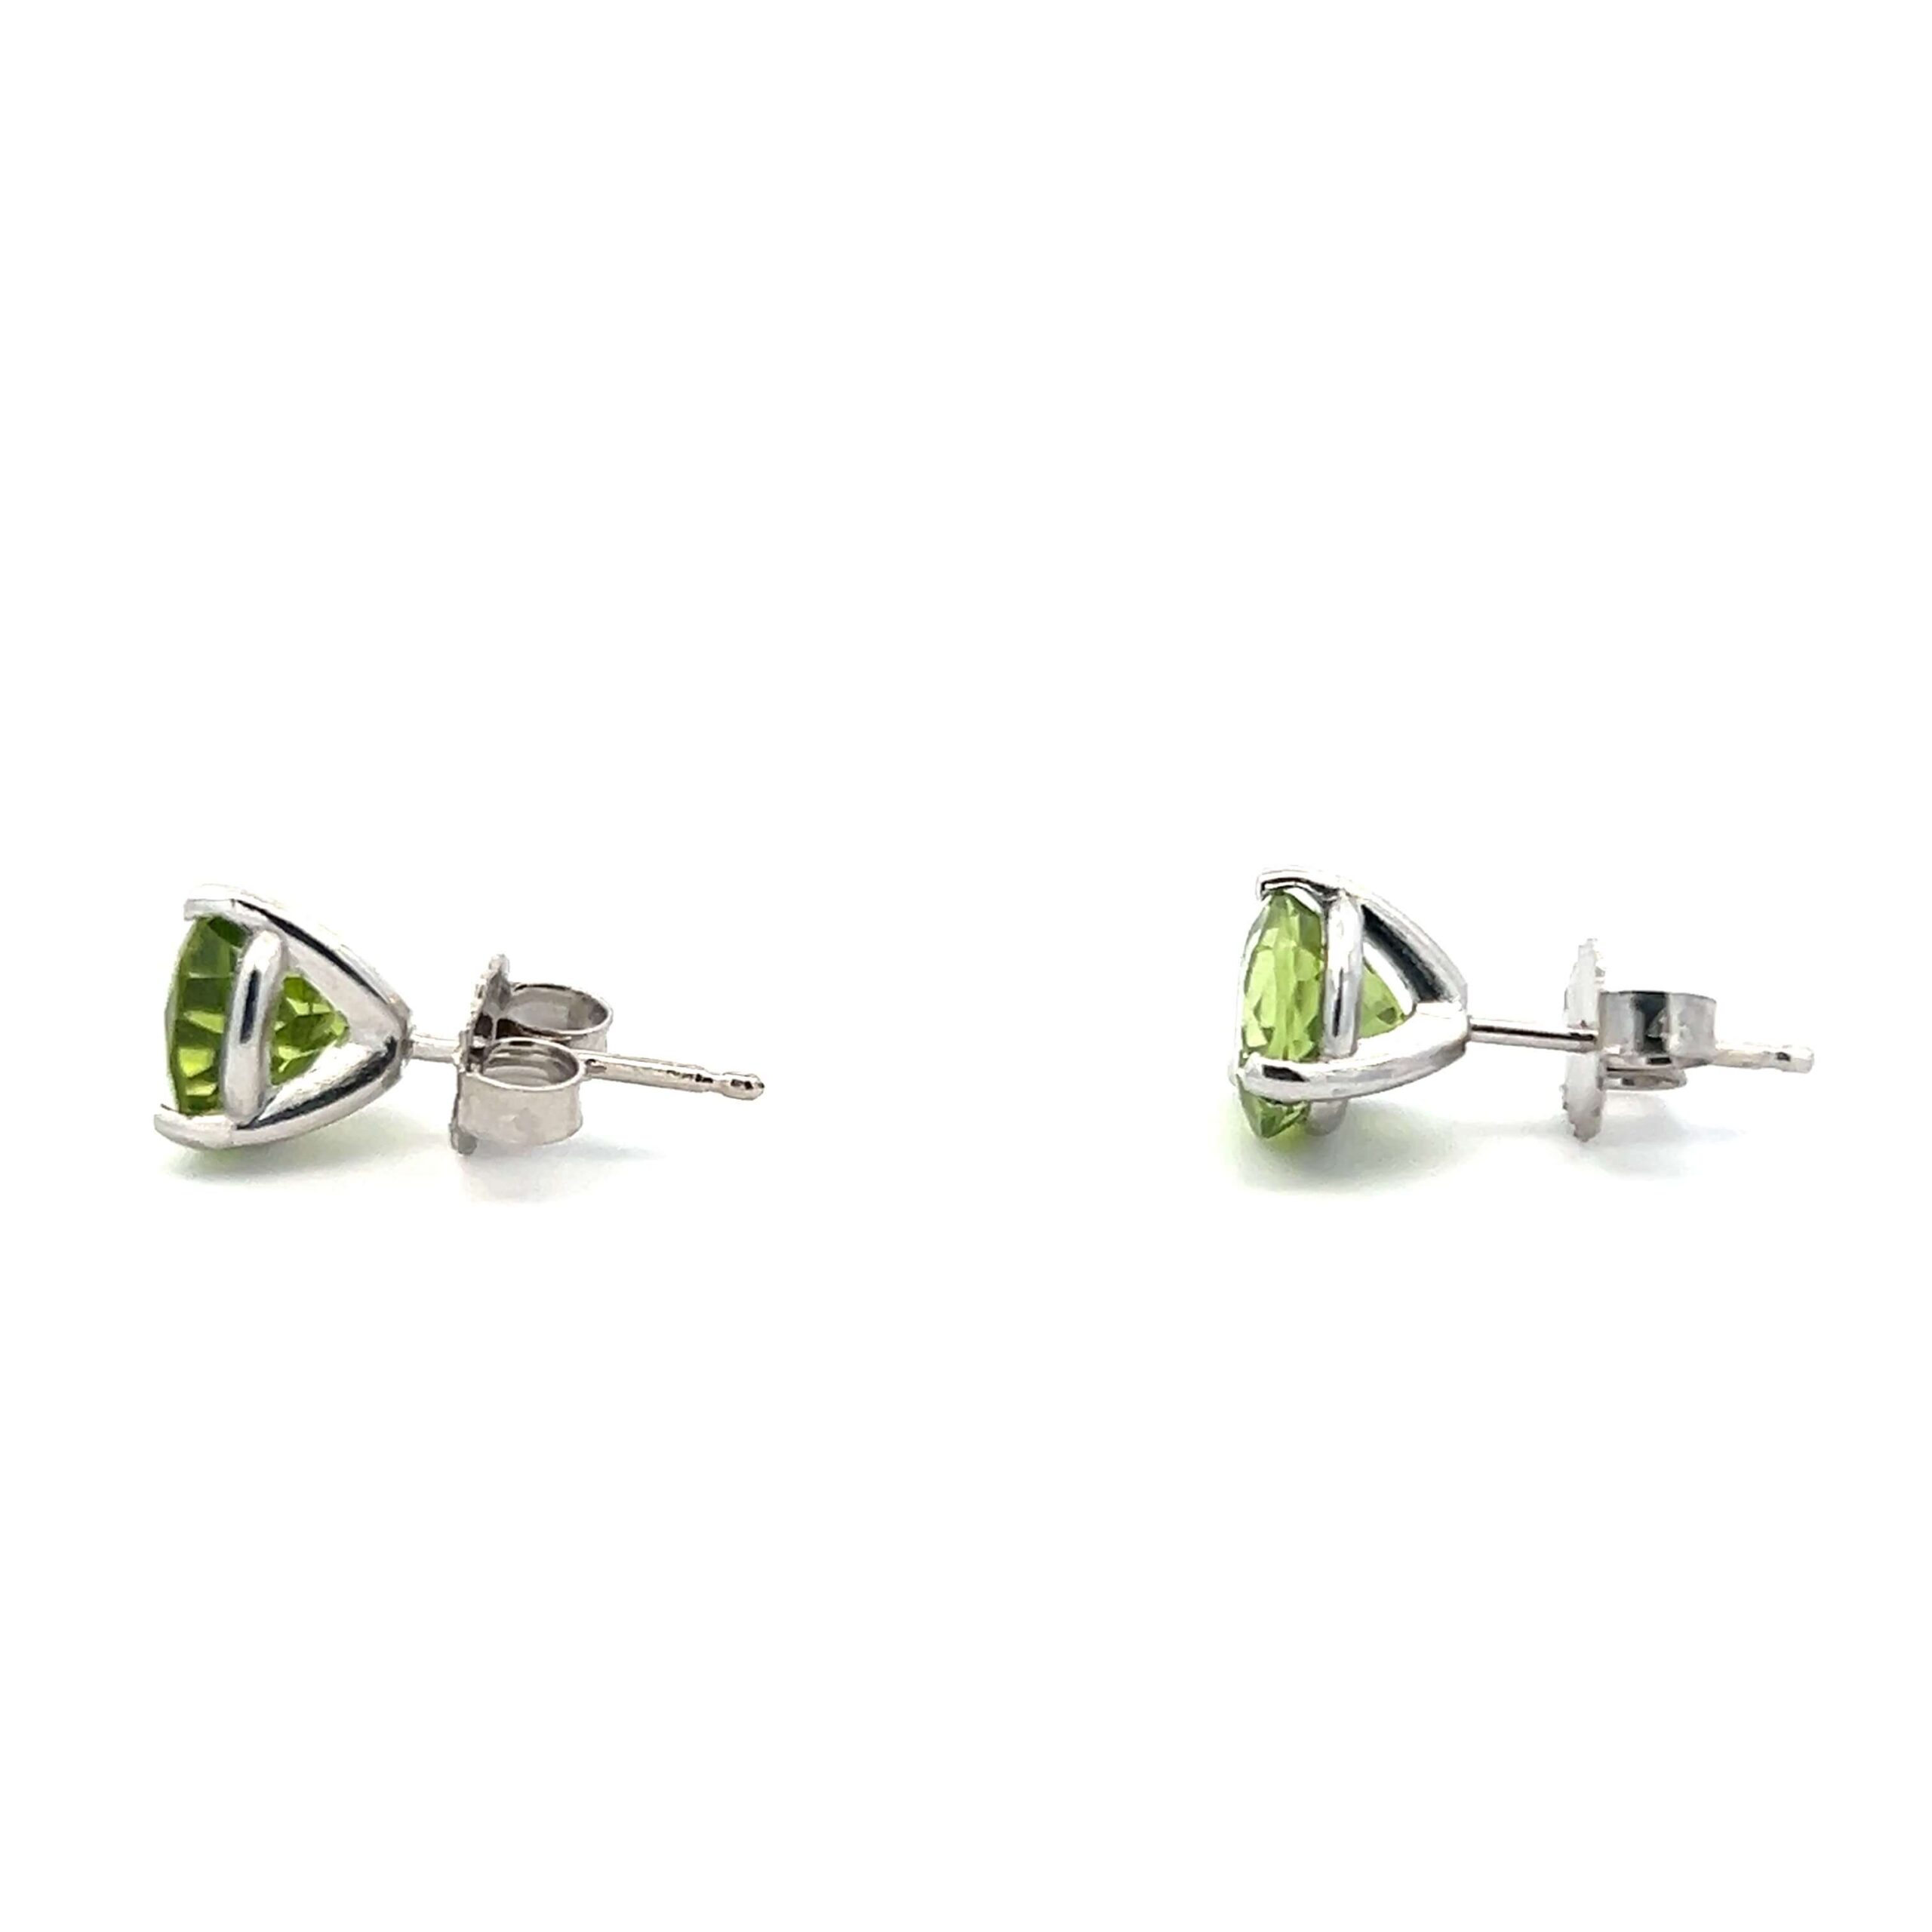 One estate pair of 14 karat white gold stud earrings with 6.5mm round-faceted peridots in three-prong settings